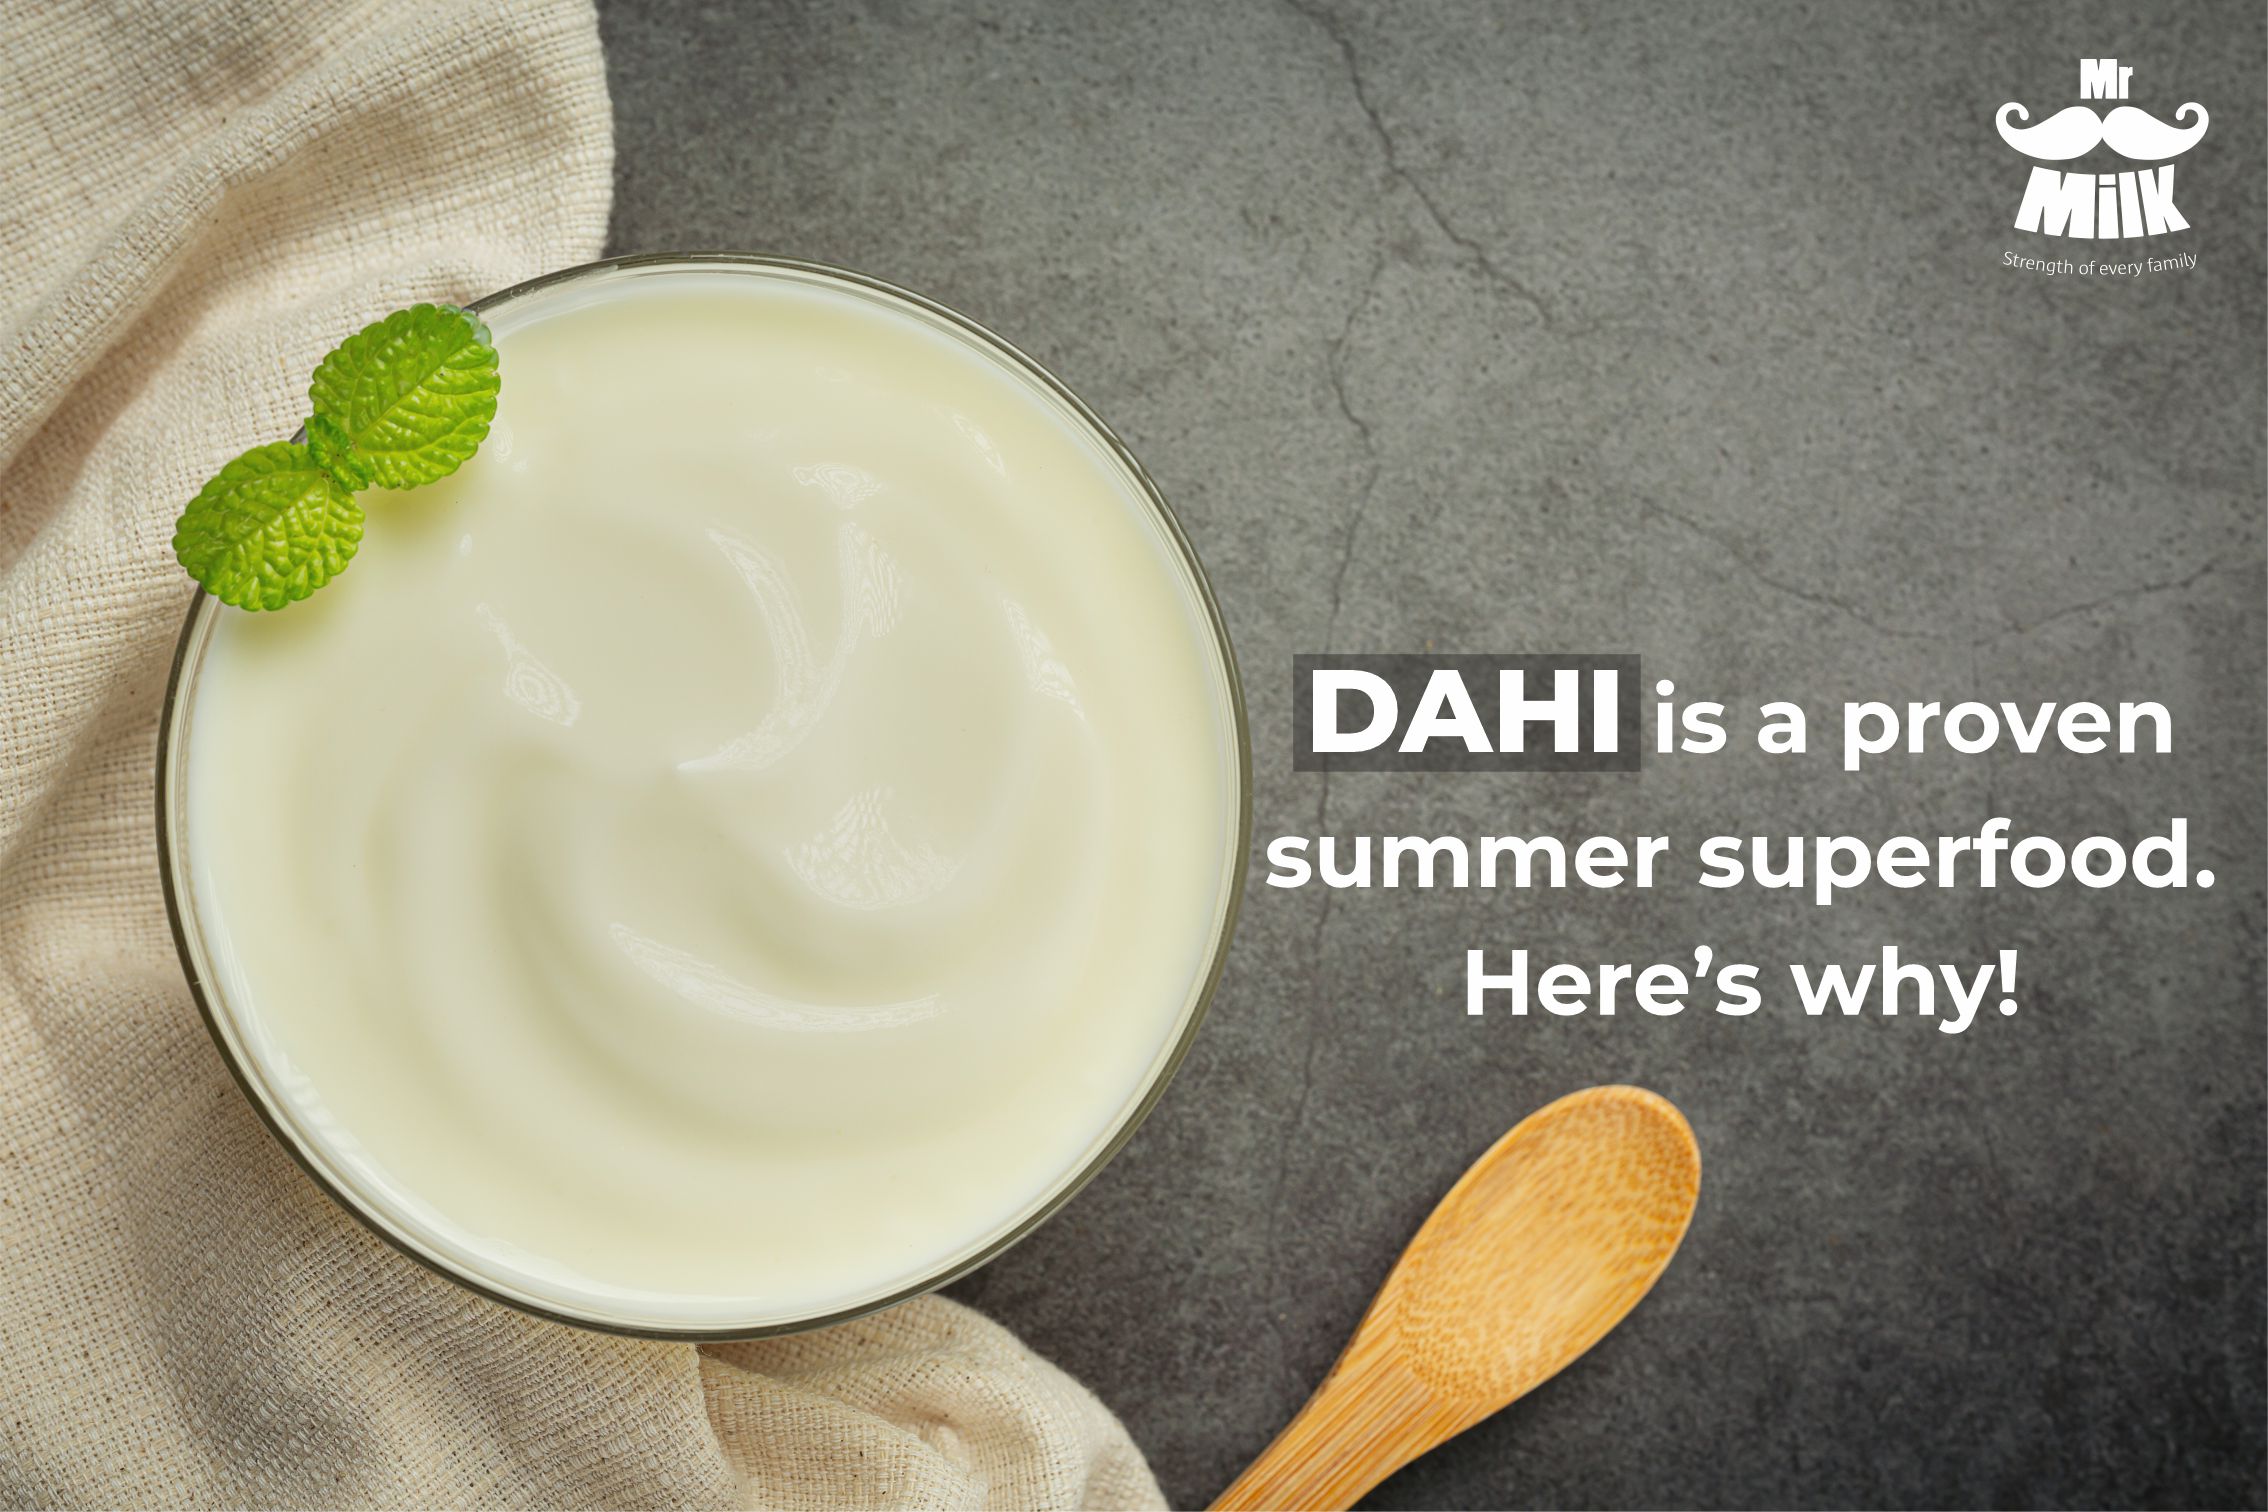 Dahi is a proven summer superfood. Here’s why!